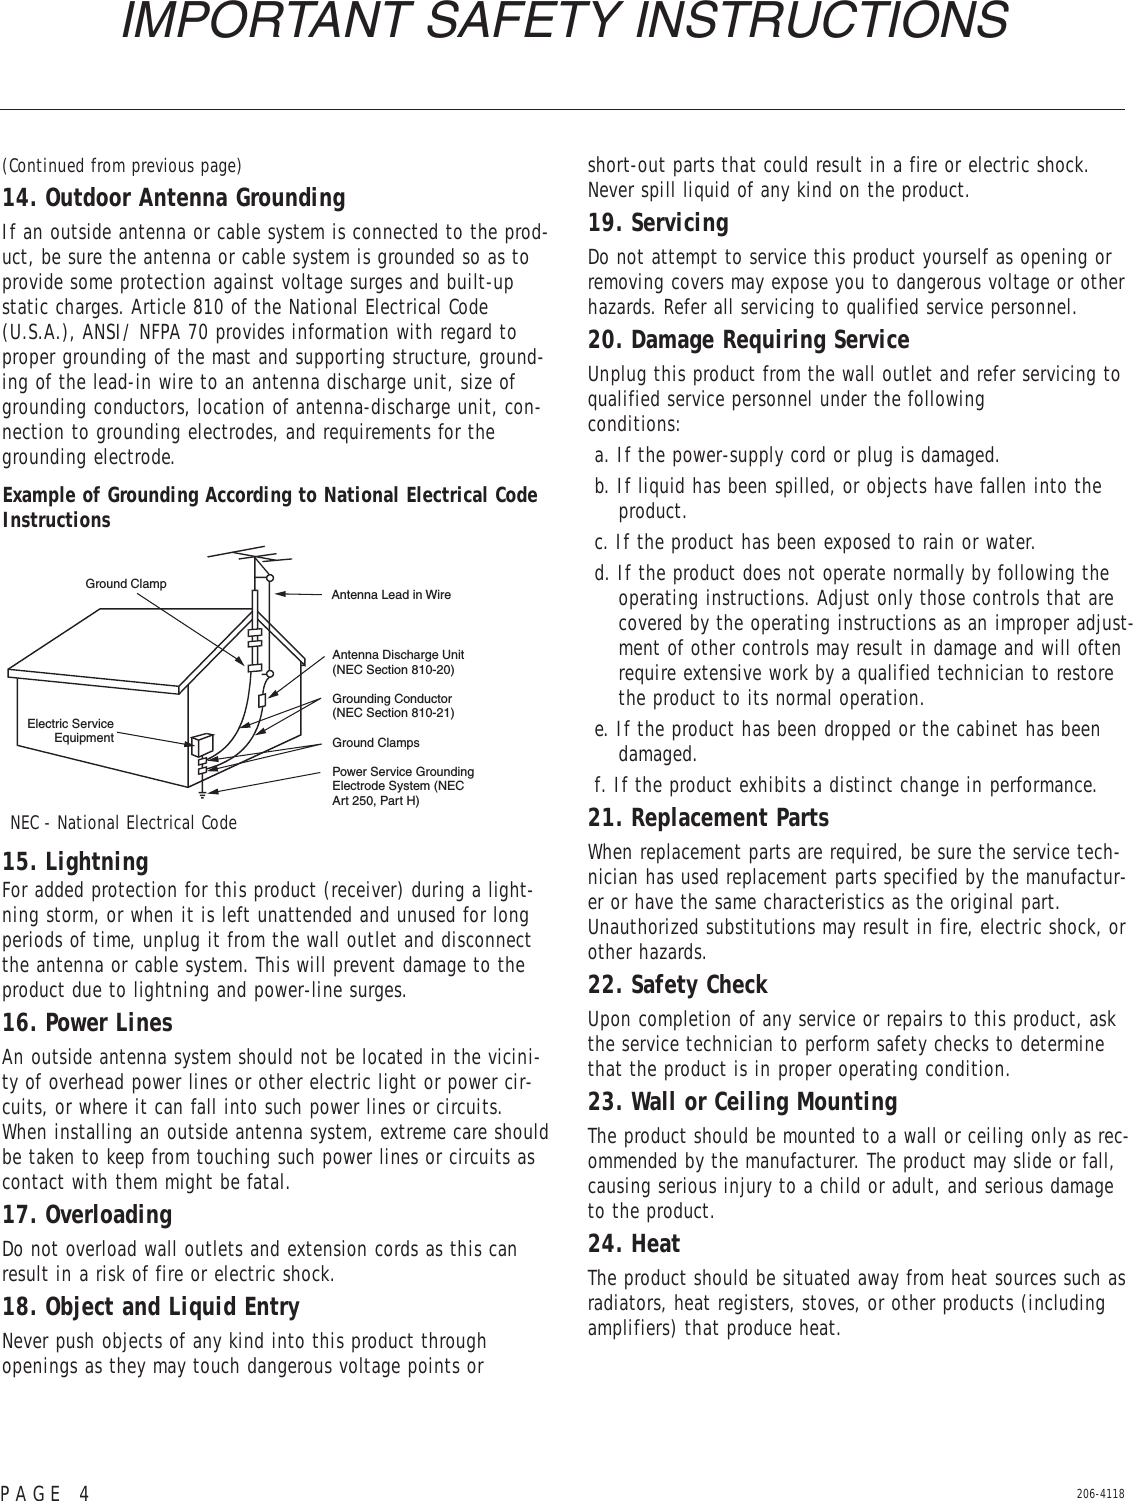 206-4118PAGE 4IMPORTANT SAFETY INSTRUCTIONS(Continued from previous page)14. Outdoor Antenna GroundingIf an outside antenna or cable system is connected to the prod-uct, be sure the antenna or cable system is grounded so as toprovide some protection against voltage surges and built-upstatic charges. Article 810 of the National Electrical Code(U.S.A.), ANSI/ NFPA 70 provides information with regard toproper grounding of the mast and supporting structure, ground-ing of the lead-in wire to an antenna discharge unit, size ofgrounding conductors, location of antenna-discharge unit, con-nection to grounding electrodes, and requirements for thegrounding electrode.15. LightningFor added protection for this product (receiver) during a light-ning storm, or when it is left unattended and unused for longperiods of time, unplug it from the wall outlet and disconnectthe antenna or cable system. This will prevent damage to theproduct due to lightning and power-line surges.16. Power LinesAn outside antenna system should not be located in the vicini-ty of overhead power lines or other electric light or power cir-cuits, or where it can fall into such power lines or circuits.When installing an outside antenna system, extreme care shouldbe taken to keep from touching such power lines or circuits ascontact with them might be fatal.17. OverloadingDo not overload wall outlets and extension cords as this canresult in a risk of fire or electric shock.18. Object and Liquid EntryNever push objects of any kind into this product through openings as they may touch dangerous voltage points or short-out parts that could result in a fire or electric shock.Never spill liquid of any kind on the product.19. ServicingDo not attempt to service this product yourself as opening orremoving covers may expose you to dangerous voltage or otherhazards. Refer all servicing to qualified service personnel.20. Damage Requiring ServiceUnplug this product from the wall outlet and refer servicing toqualified service personnel under the following conditions:a. If the power-supply cord or plug is damaged.b. If liquid has been spilled, or objects have fallen into theproduct.c. If the product has been exposed to rain or water.d. If the product does not operate normally by following theoperating instructions. Adjust only those controls that arecovered by the operating instructions as an improper adjust-ment of other controls may result in damage and will oftenrequire extensive work by a qualified technician to restorethe product to its normal operation.e. If the product has been dropped or the cabinet has beendamaged.f. If the product exhibits a distinct change in performance.21. Replacement PartsWhen replacement parts are required, be sure the service tech-nician has used replacement parts specified by the manufactur-er or have the same characteristics as the original part.Unauthorized substitutions may result in fire, electric shock, orother hazards.22. Safety CheckUpon completion of any service or repairs to this product, askthe service technician to perform safety checks to determinethat the product is in proper operating condition.23. Wall or Ceiling MountingThe product should be mounted to a wall or ceiling only as rec-ommended by the manufacturer. The product may slide or fall,causing serious injury to a child or adult, and serious damageto the product.24. HeatThe product should be situated away from heat sources such asradiators, heat registers, stoves, or other products (includingamplifiers) that produce heat.Antenna Lead in WireAntenna Discharge Unit(NEC Section 810-20)Grounding Conductor(NEC Section 810-21)Ground ClampsPower Service GroundingElectrode System (NECArt 250, Part H)Ground ClampElectric ServiceEquipmentExample of Grounding According to National Electrical CodeInstructionsNEC - National Electrical Code